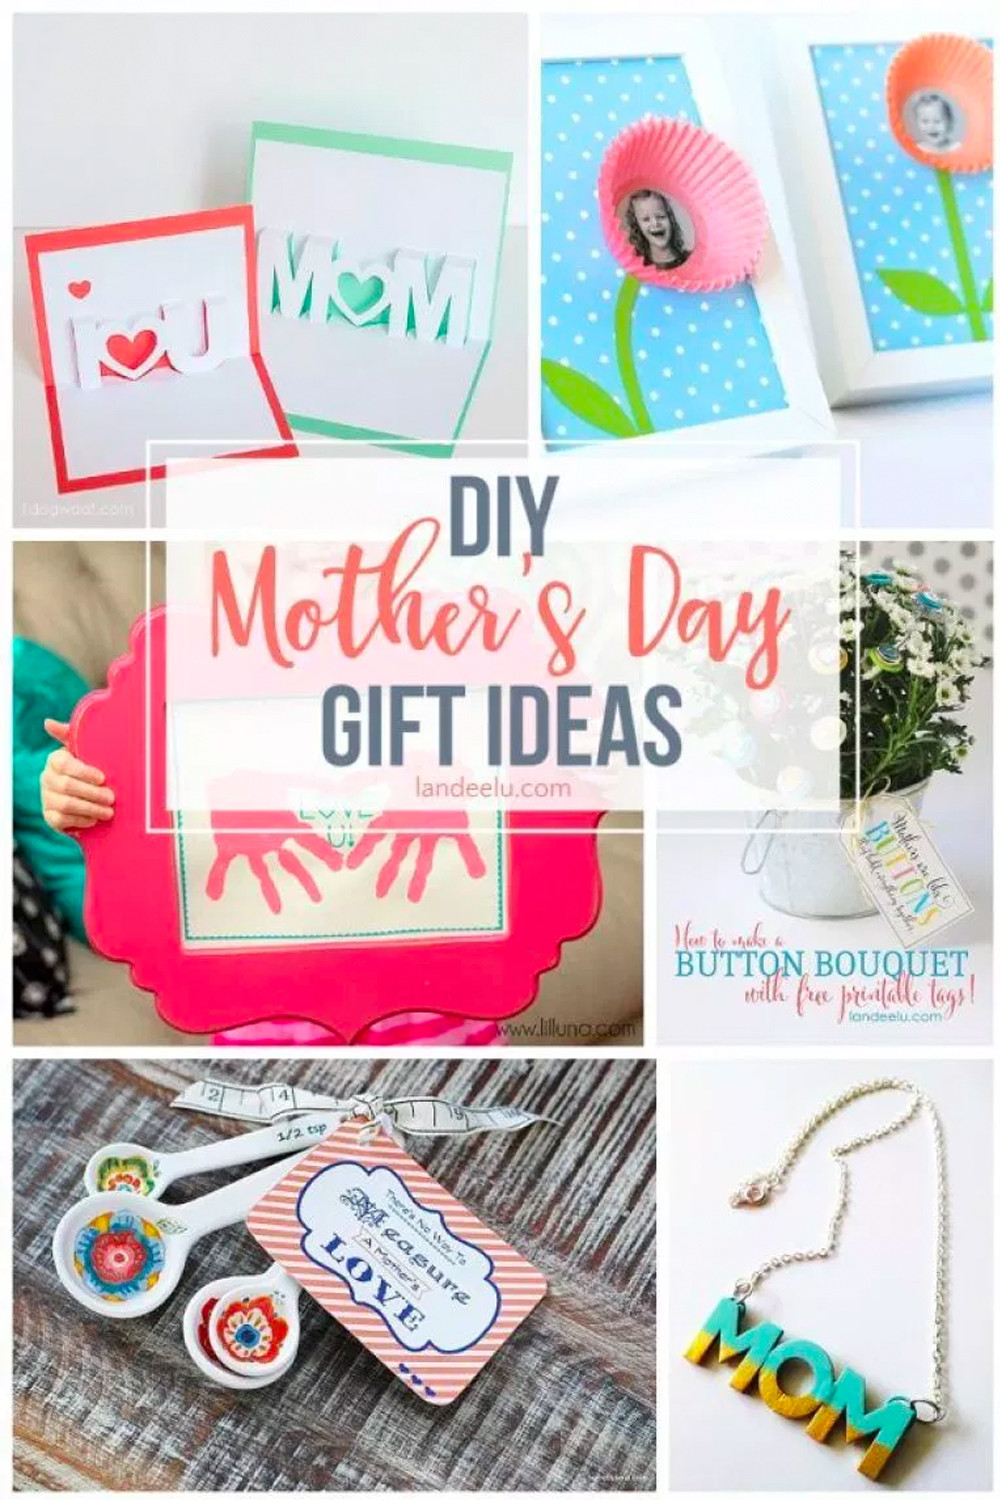 Mother's Day Gift Ideas 2016
 DIY Mothers Day Gift Ideas landeelu